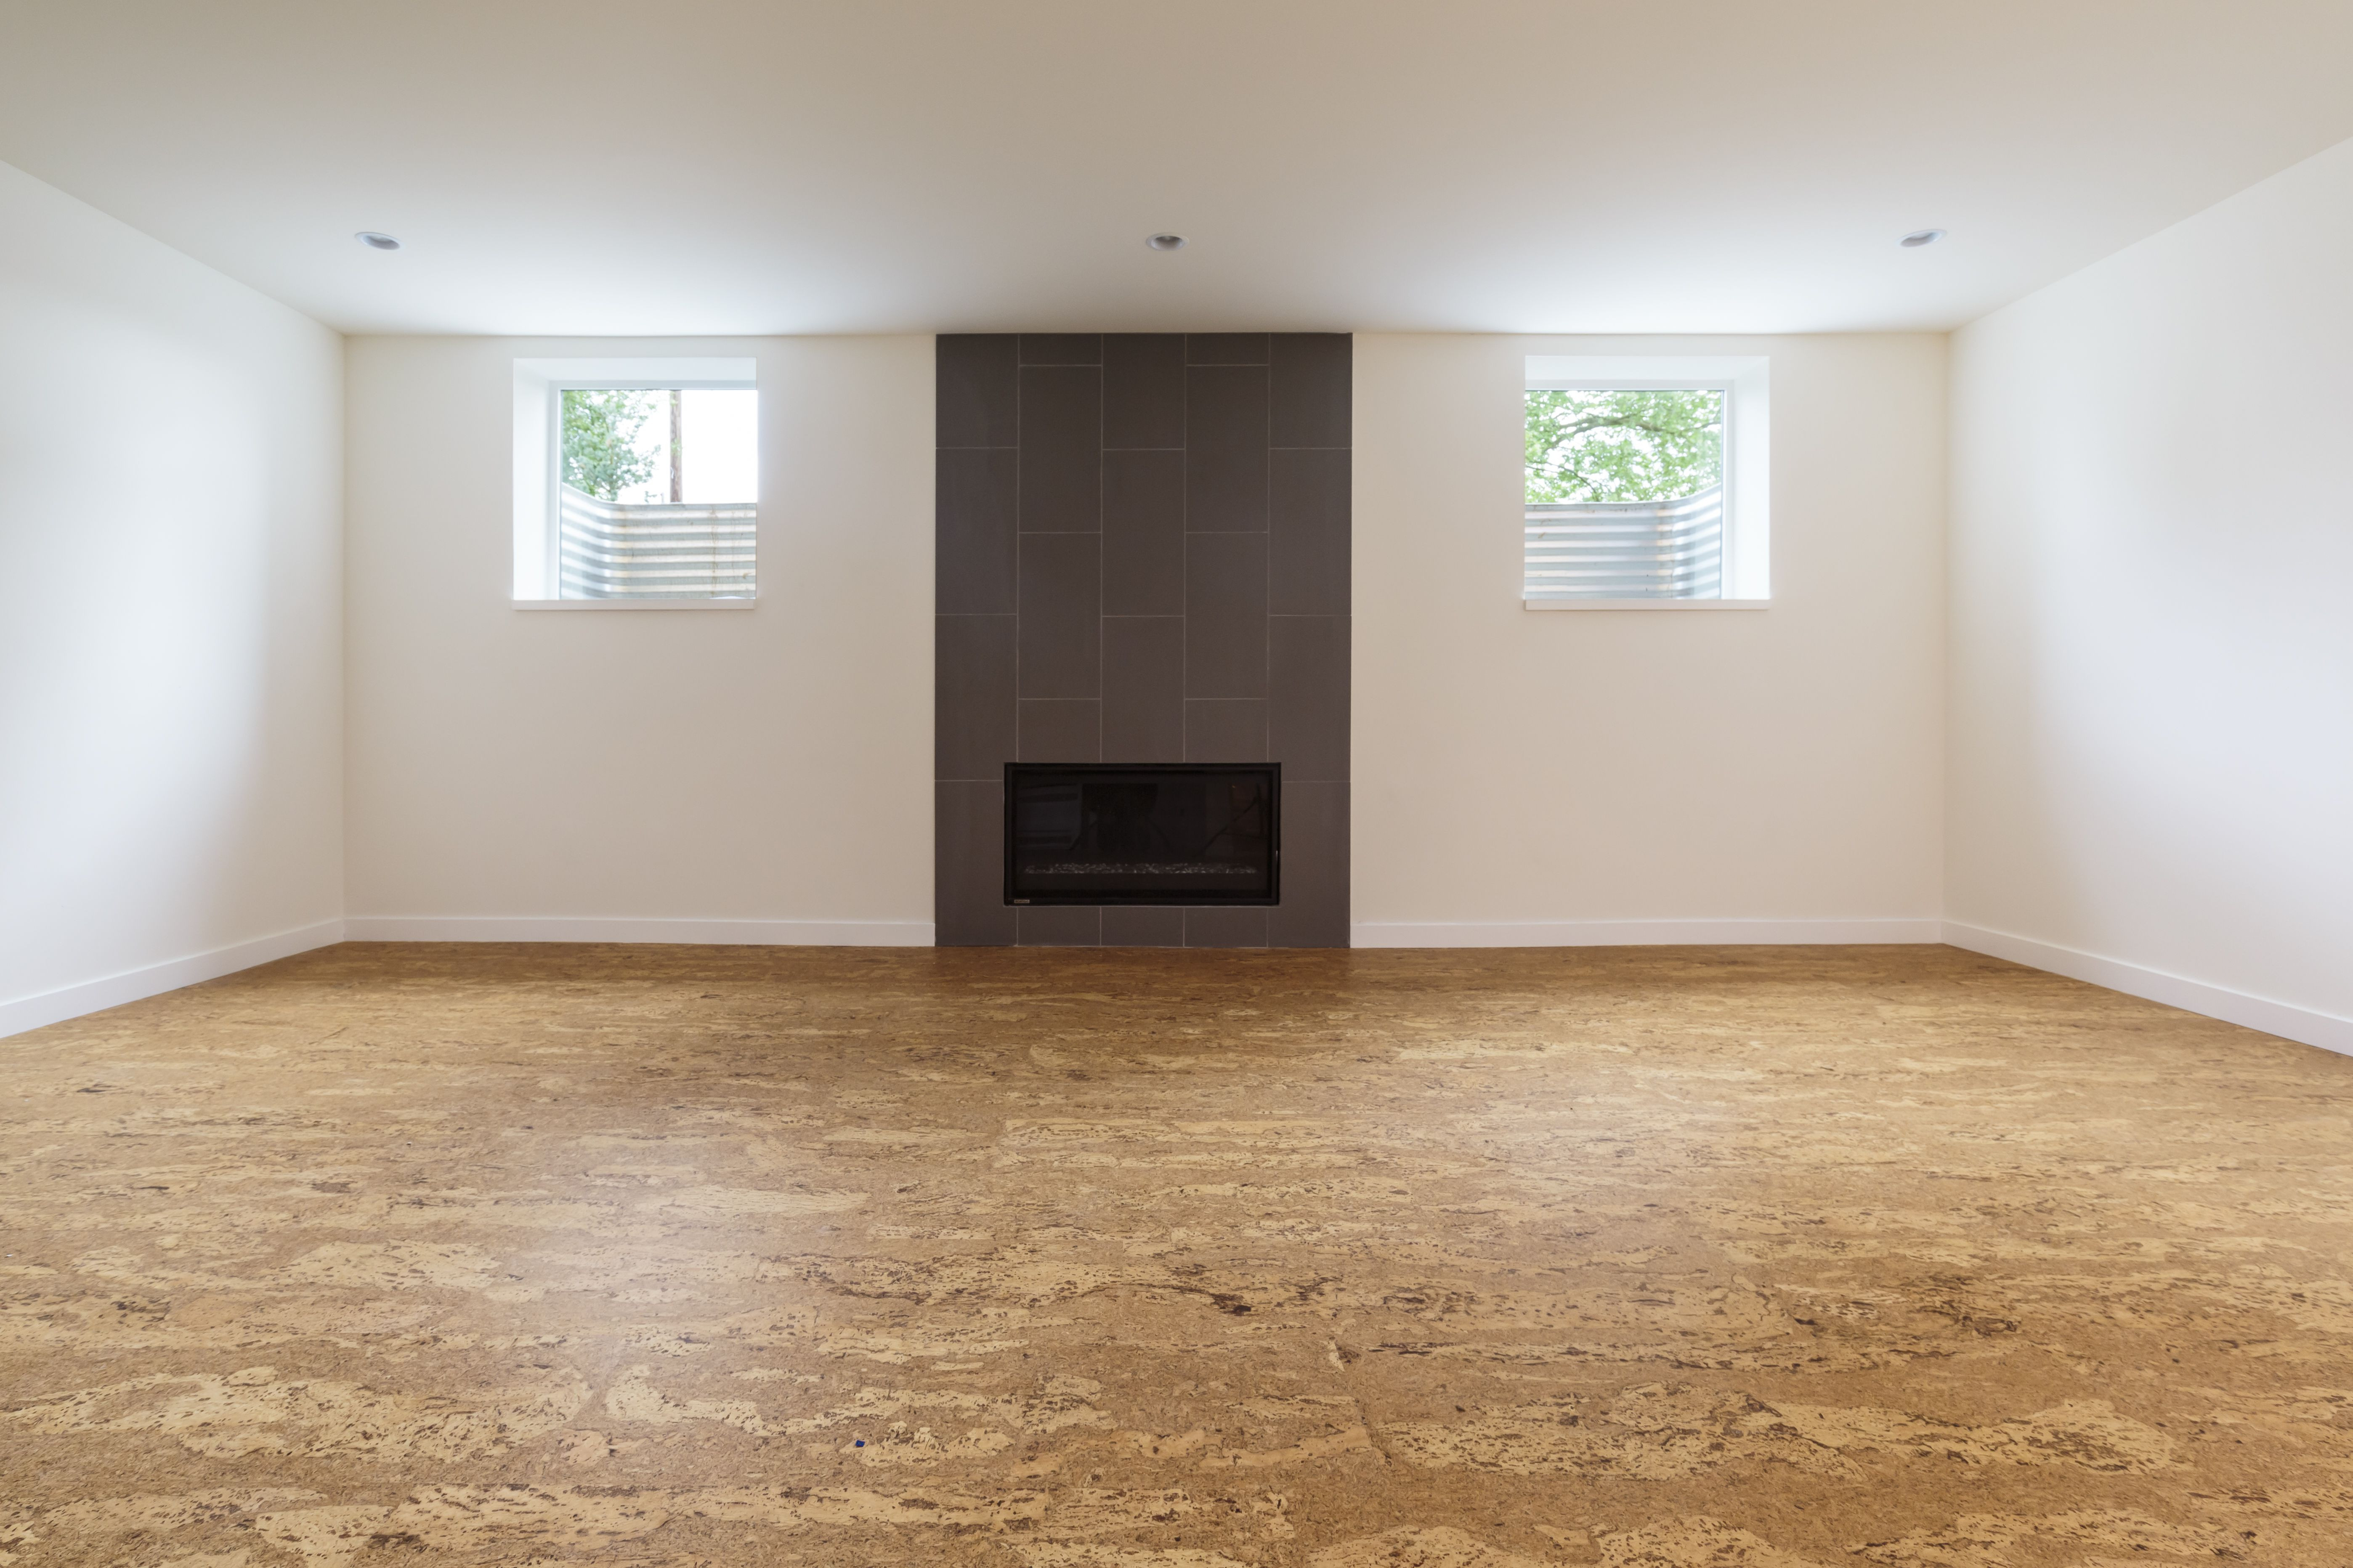 11 Elegant Hardwood Floor Estimate Sheet 2024 free download hardwood floor estimate sheet of cork flooring pros cons and cost pertaining to cork flooring in unfurnished new home 647206431 57e7c0c95f9b586c3504ca07